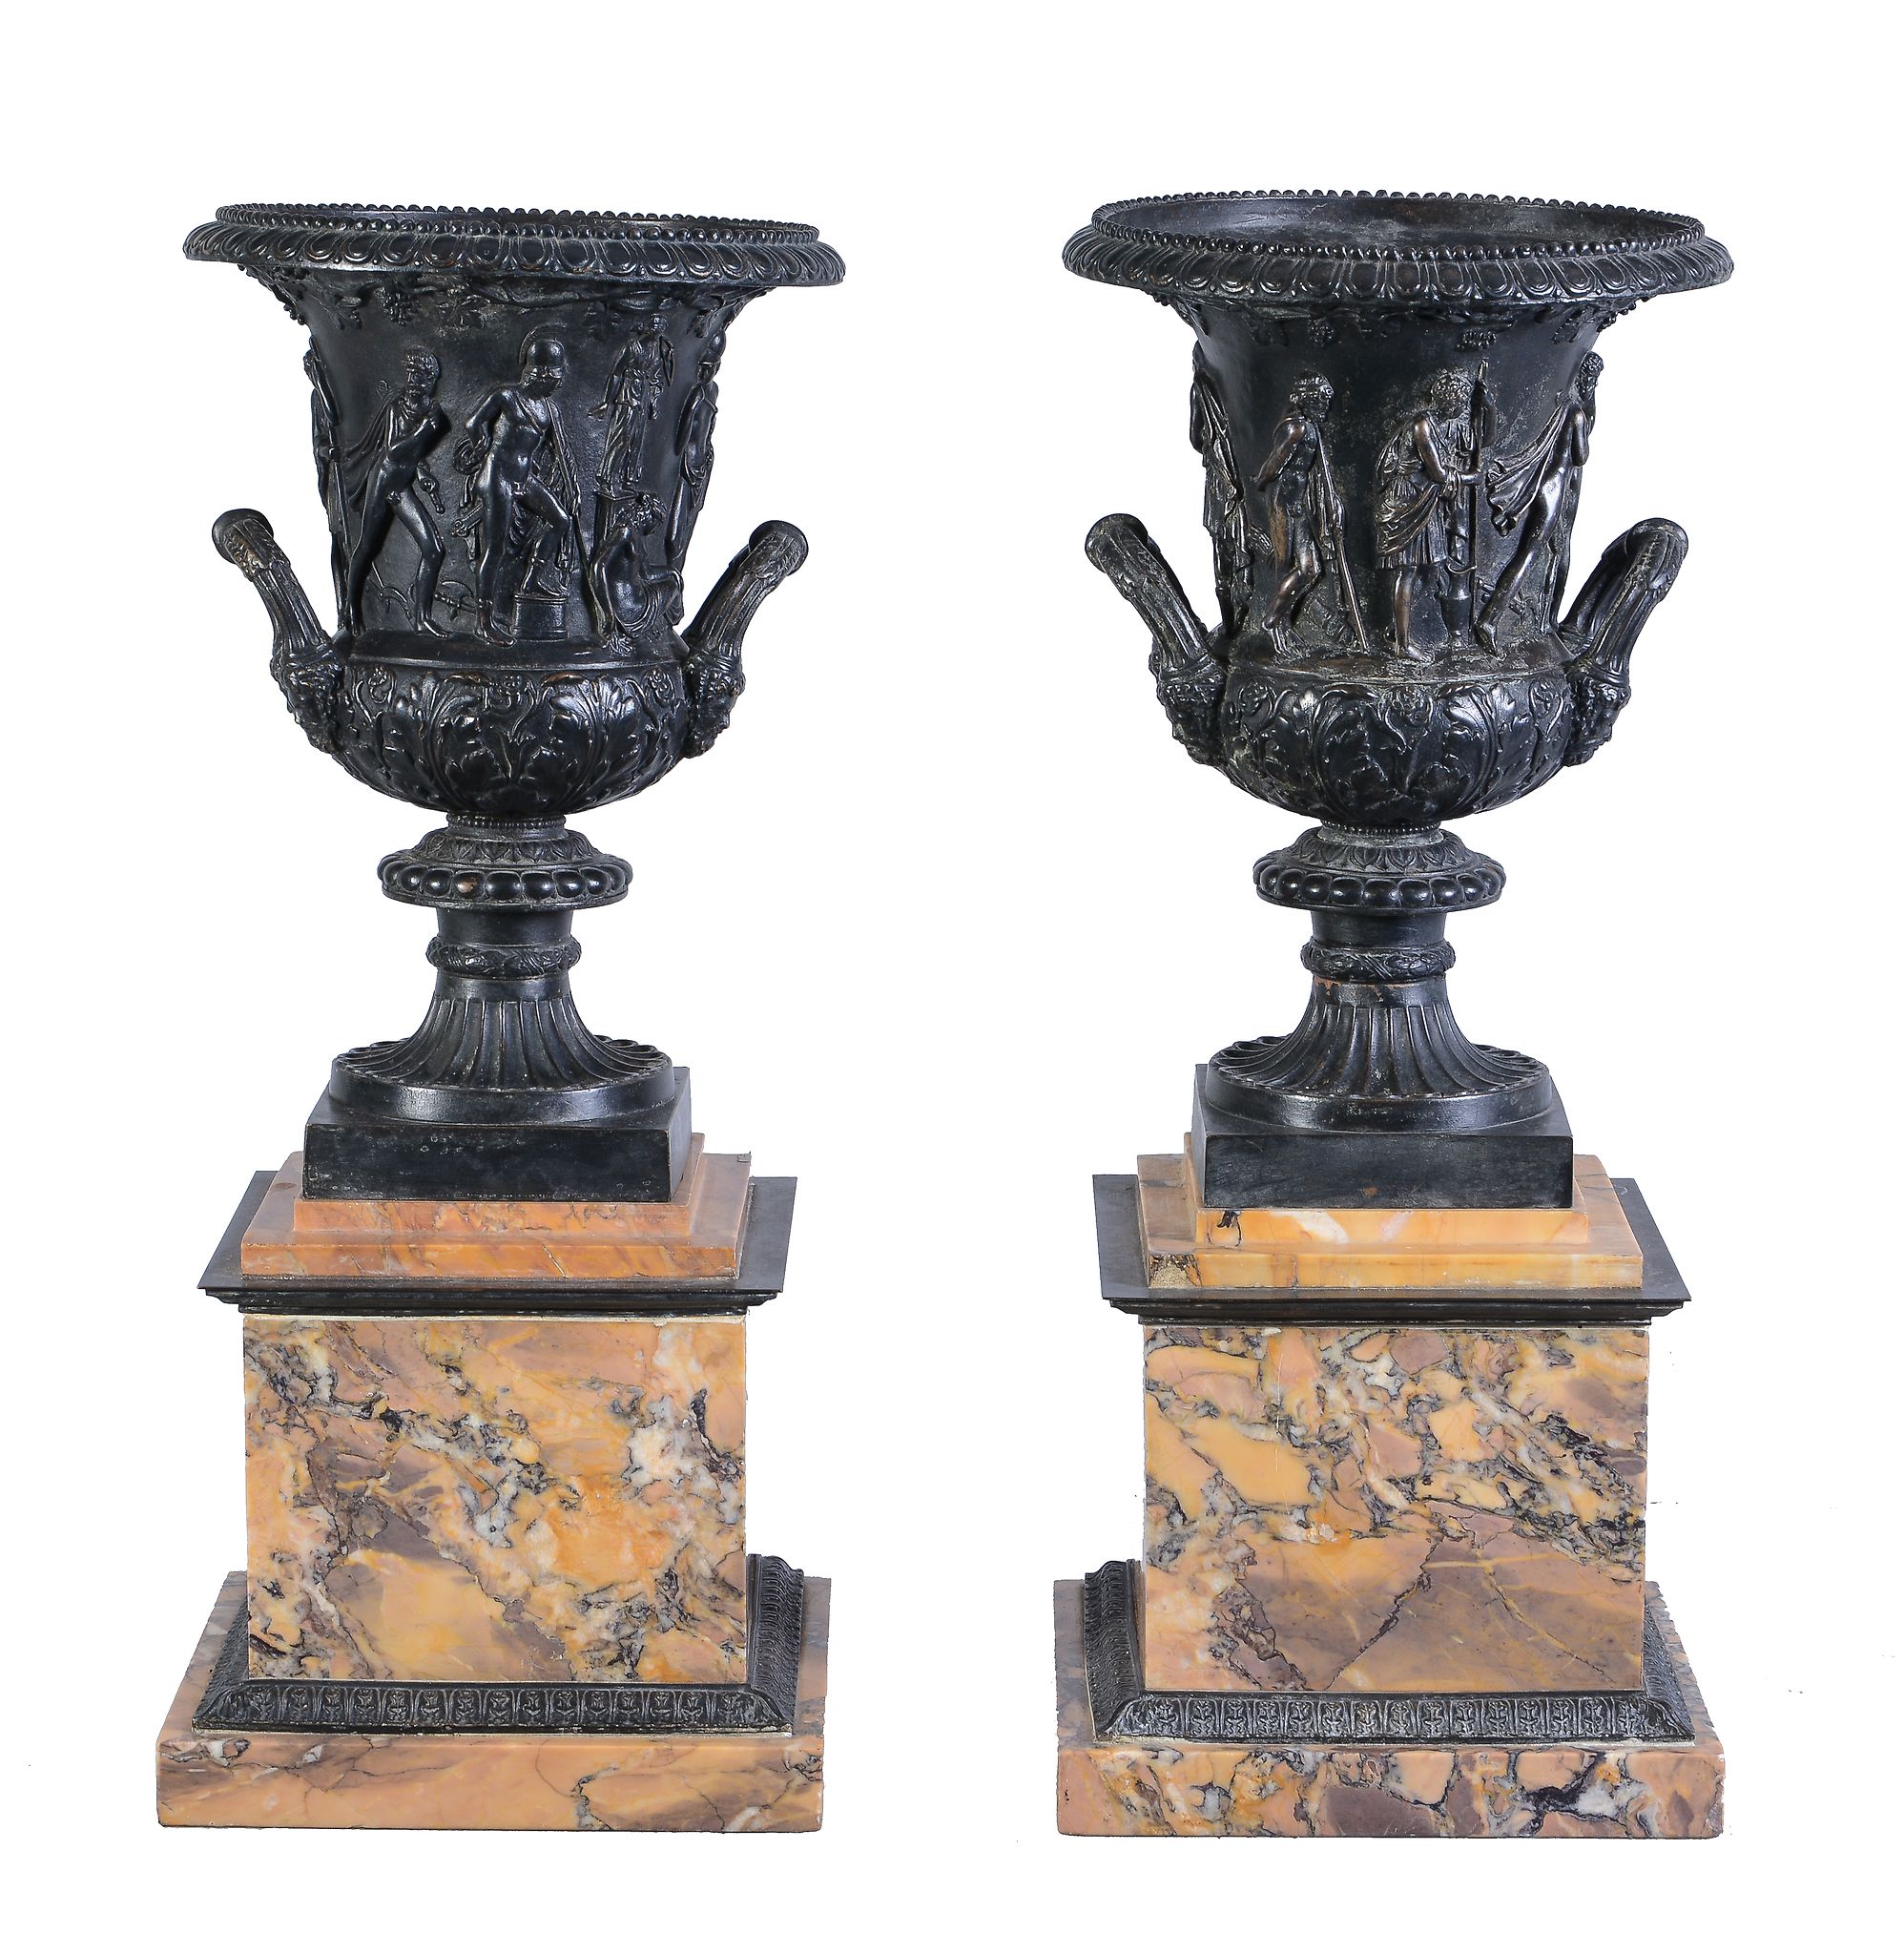 A pair of impressive bronze and marble mounted models of the Medici vase, circa 1875, with egg-and-